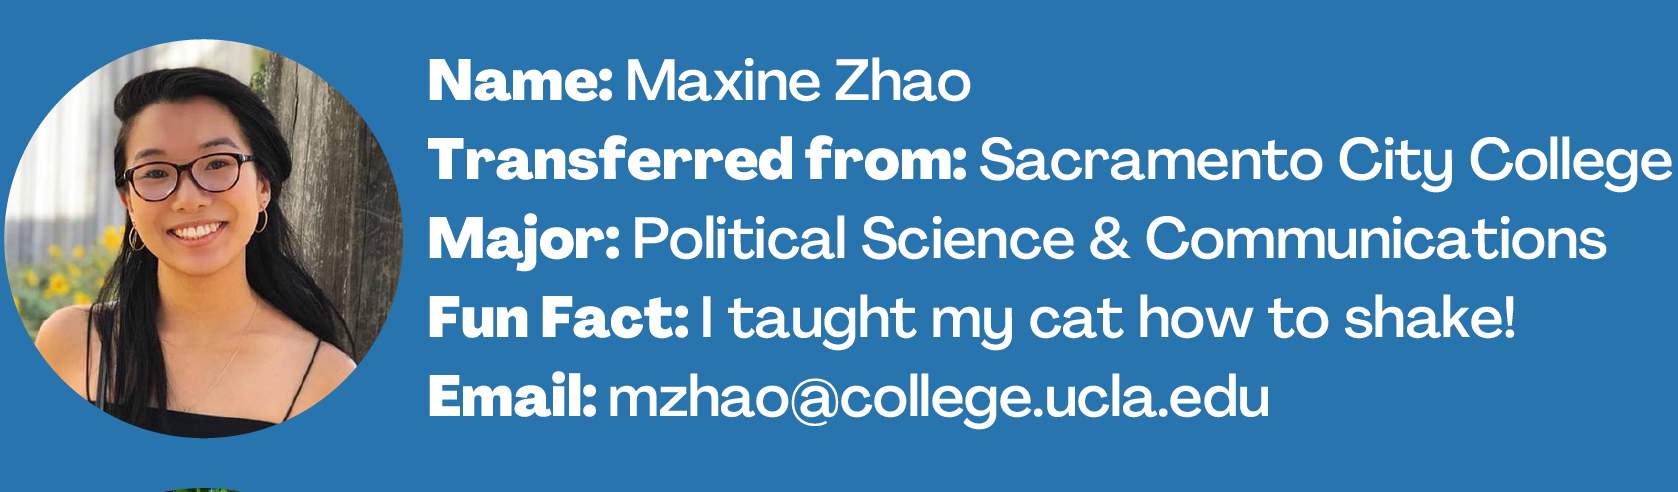 Fact Sheet of the Student Maxine Zhao